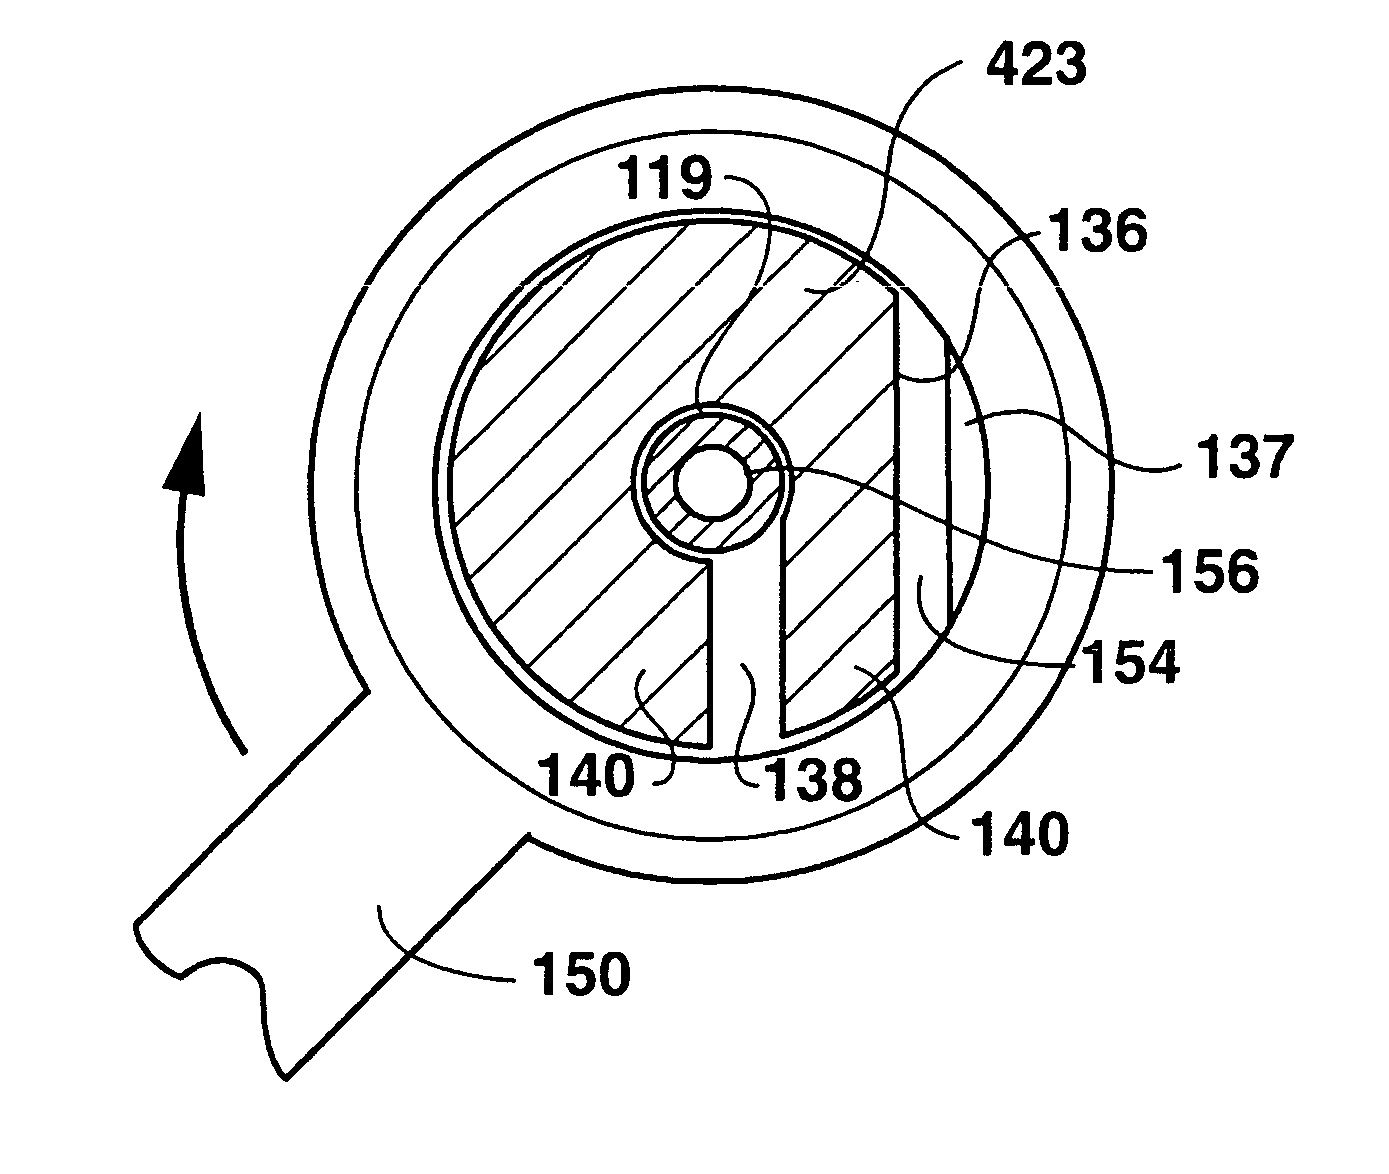 Ultrasound guided probe device and method of using same